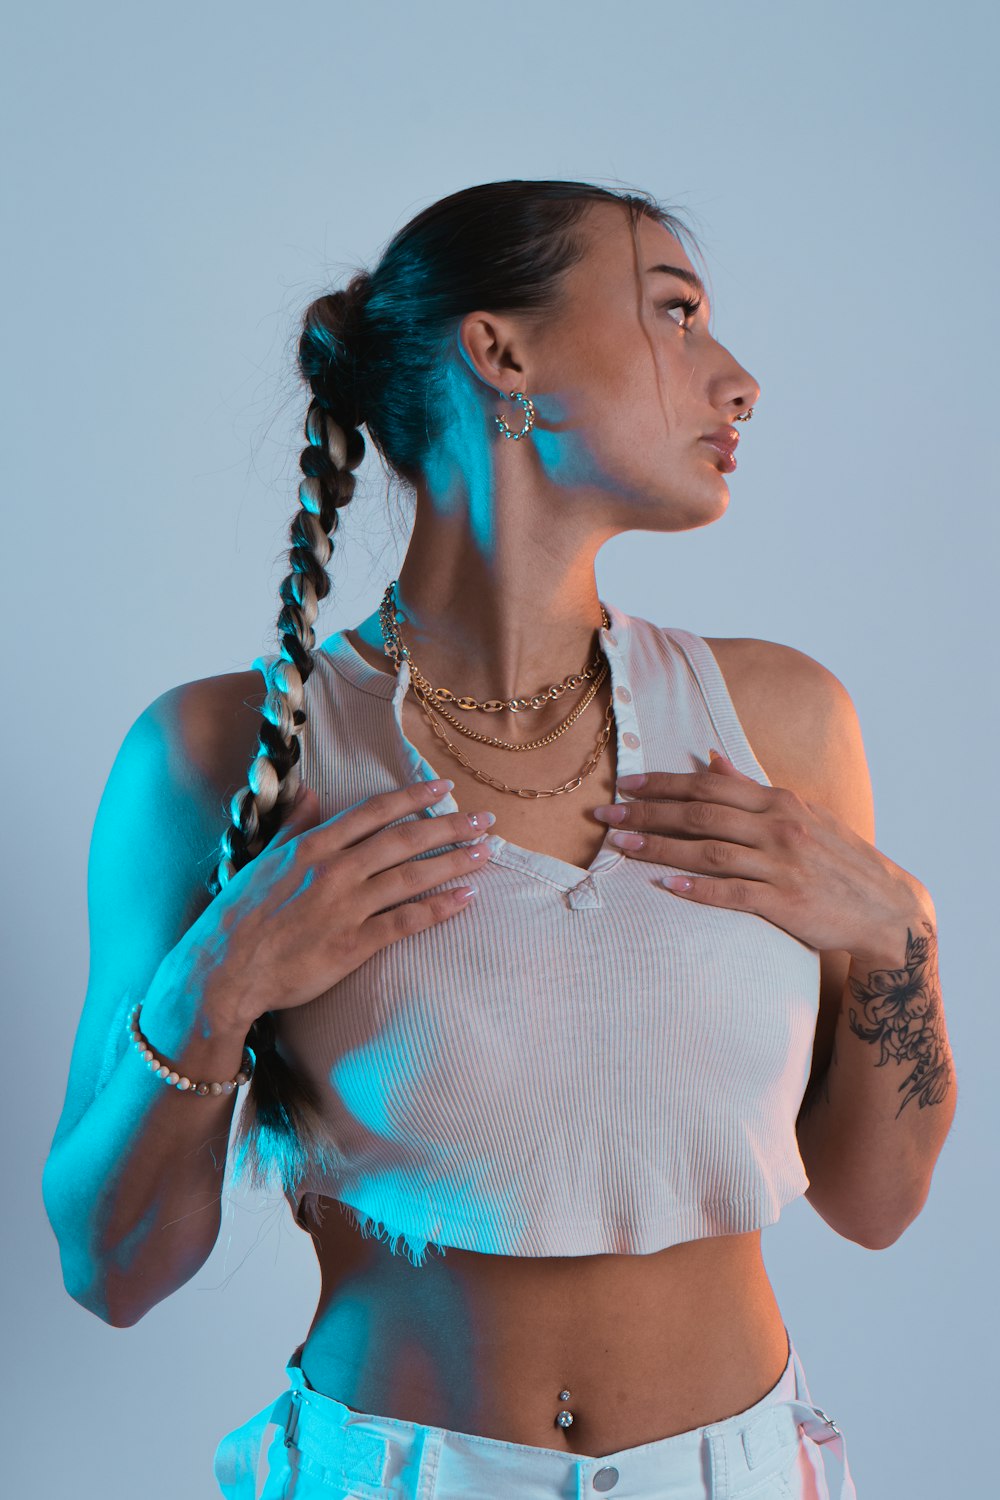 a woman wearing a white crop top with a braid in her hair